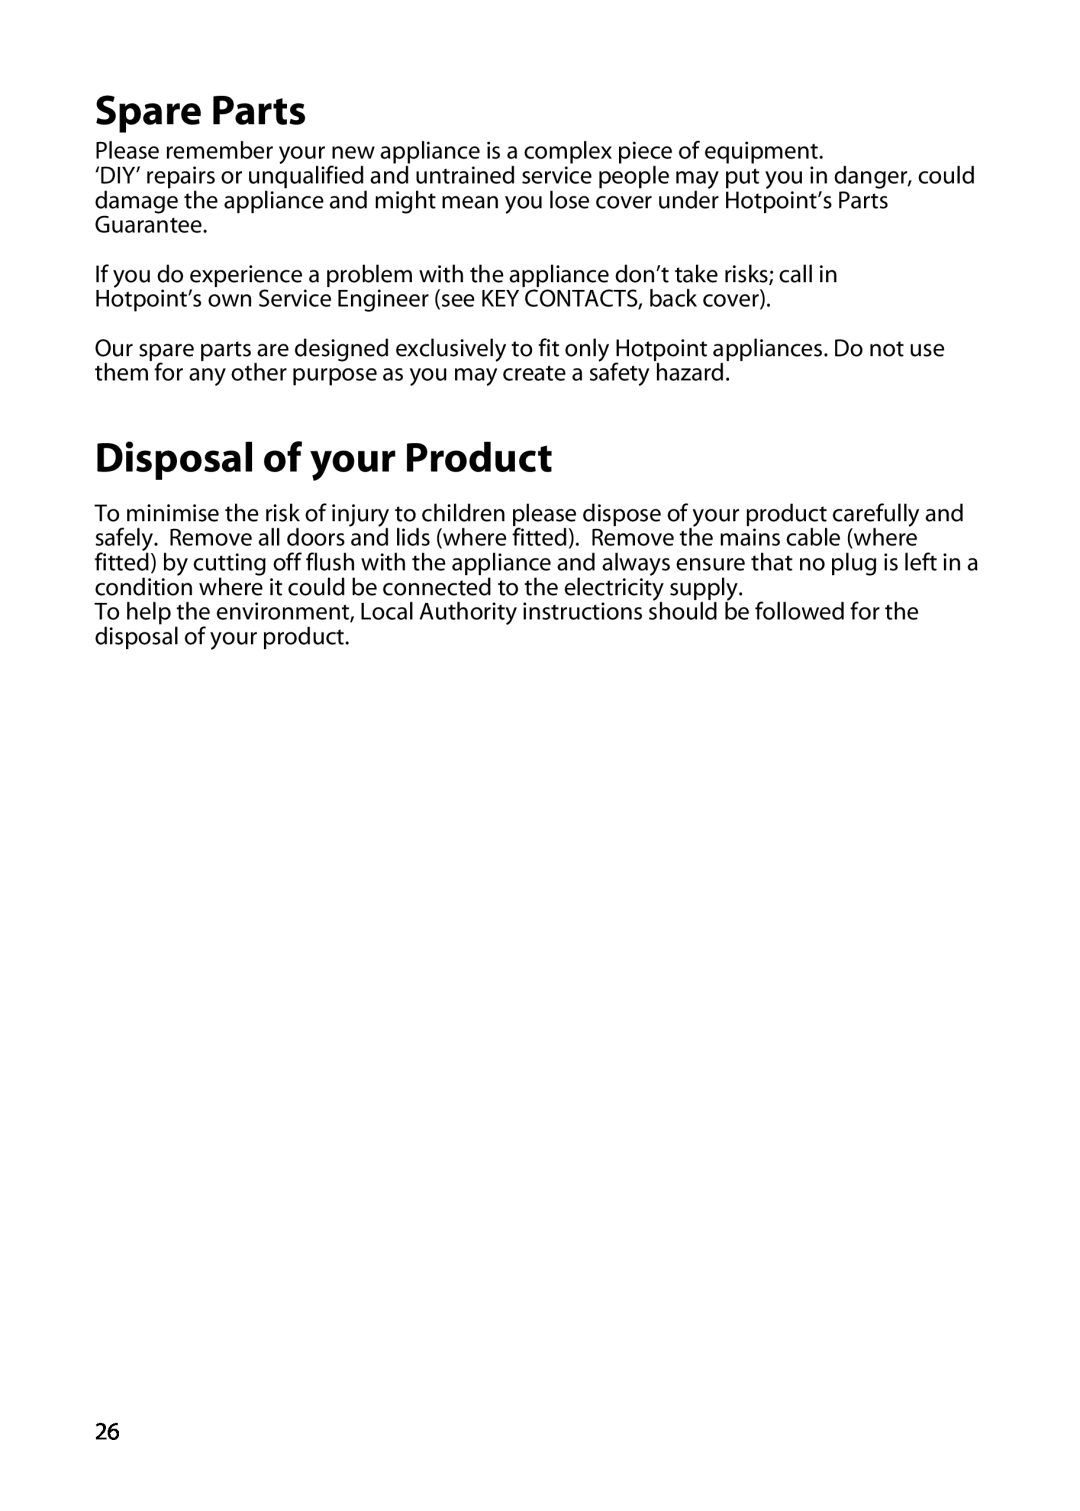 Hotpoint EW22 manual Spare Parts, Disposal of your Product 